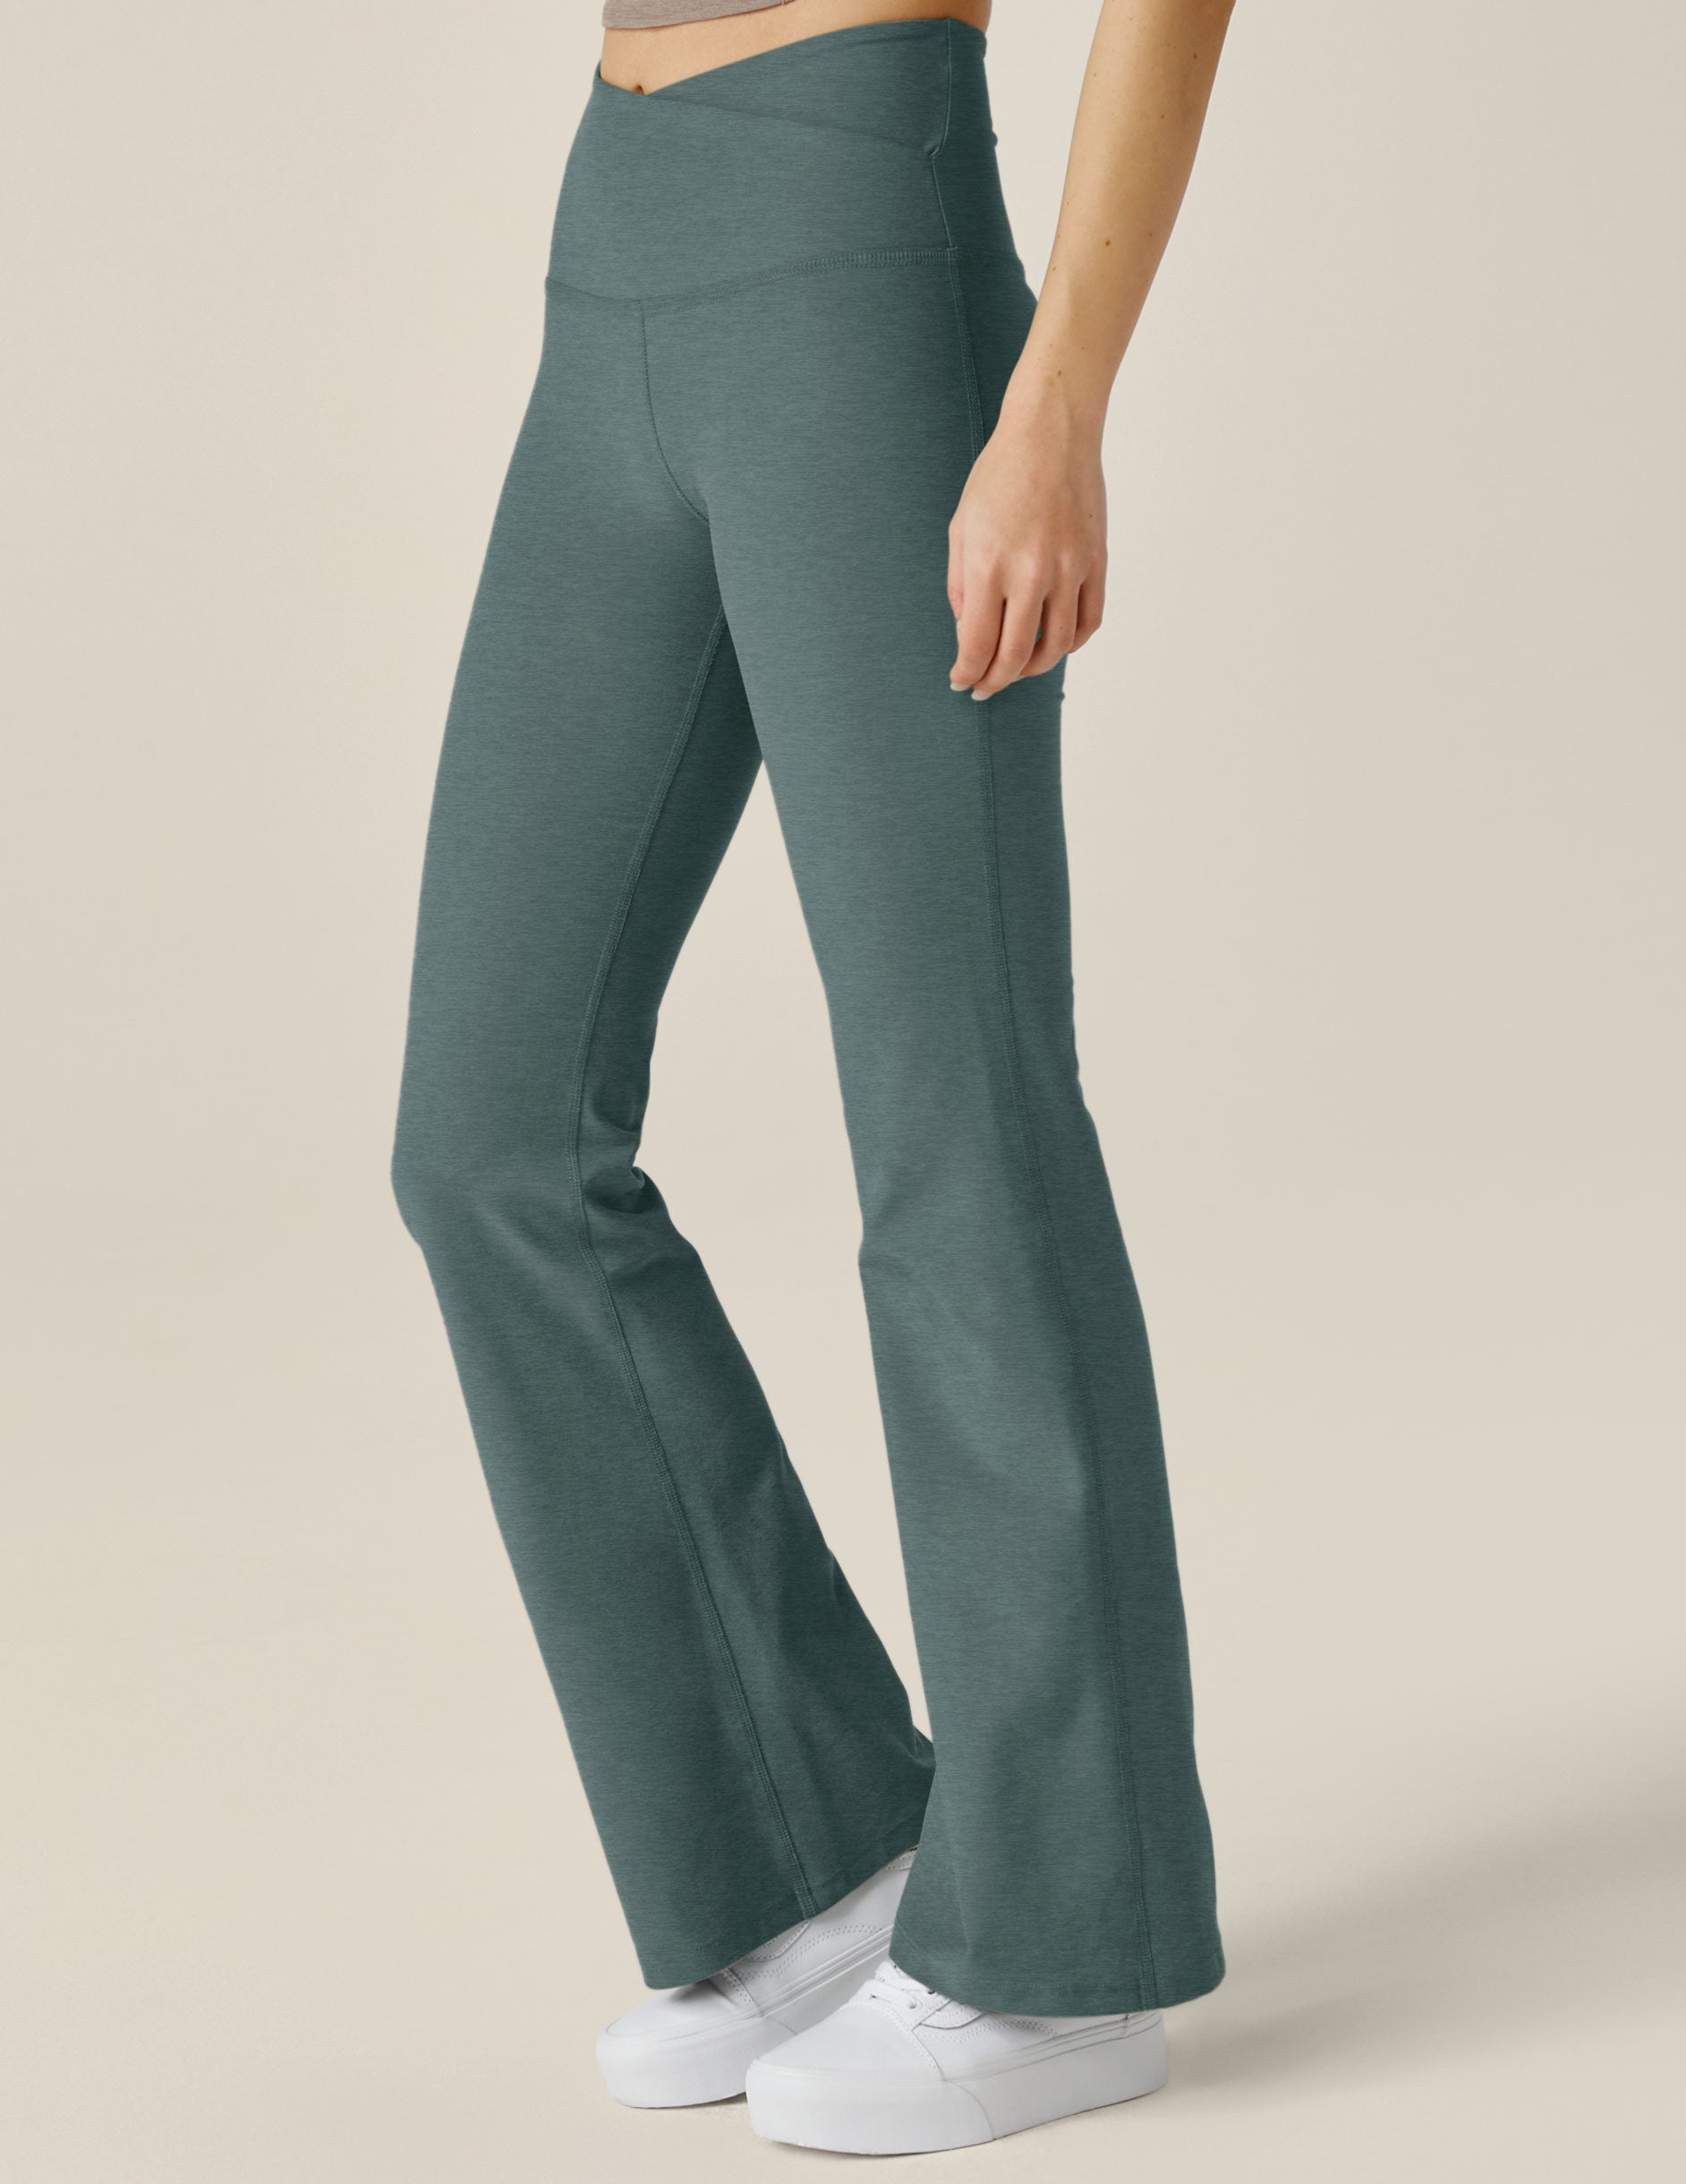 green high-waisted flare pants with a crossover detail on the front waistband. 